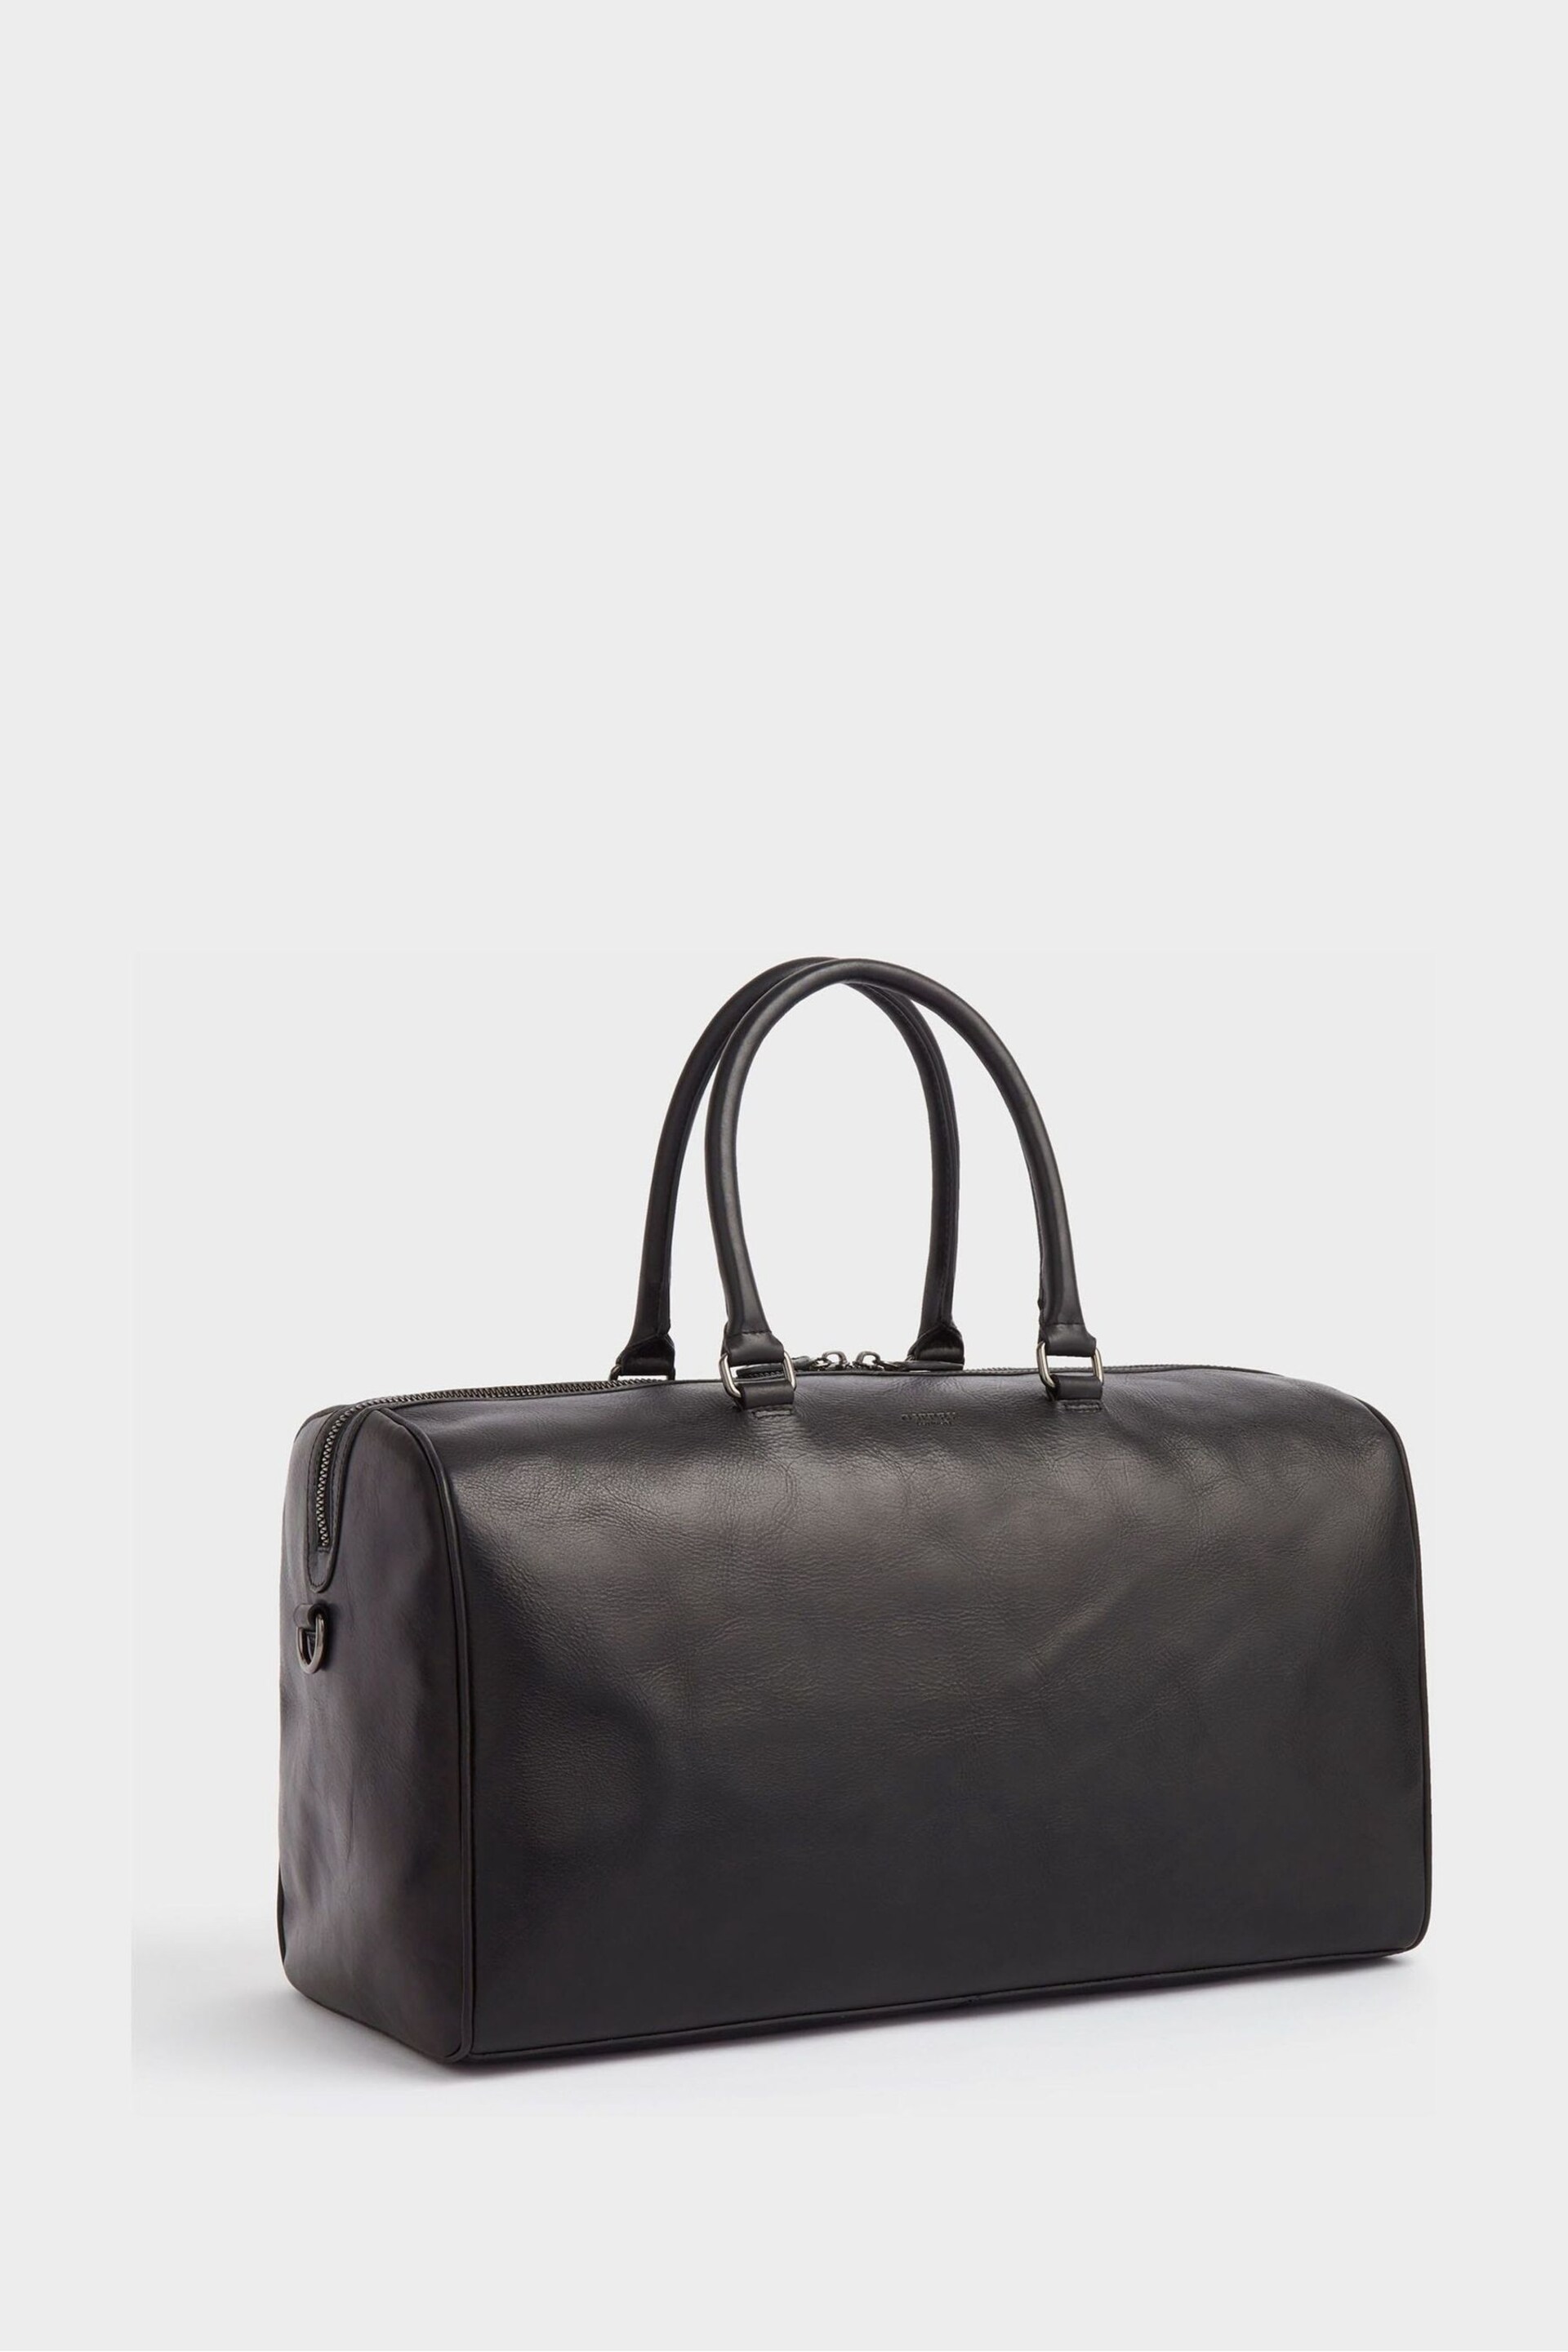 OSPREY LONDON The Carter Leather Weekend Holdall Bag - Image 2 of 5